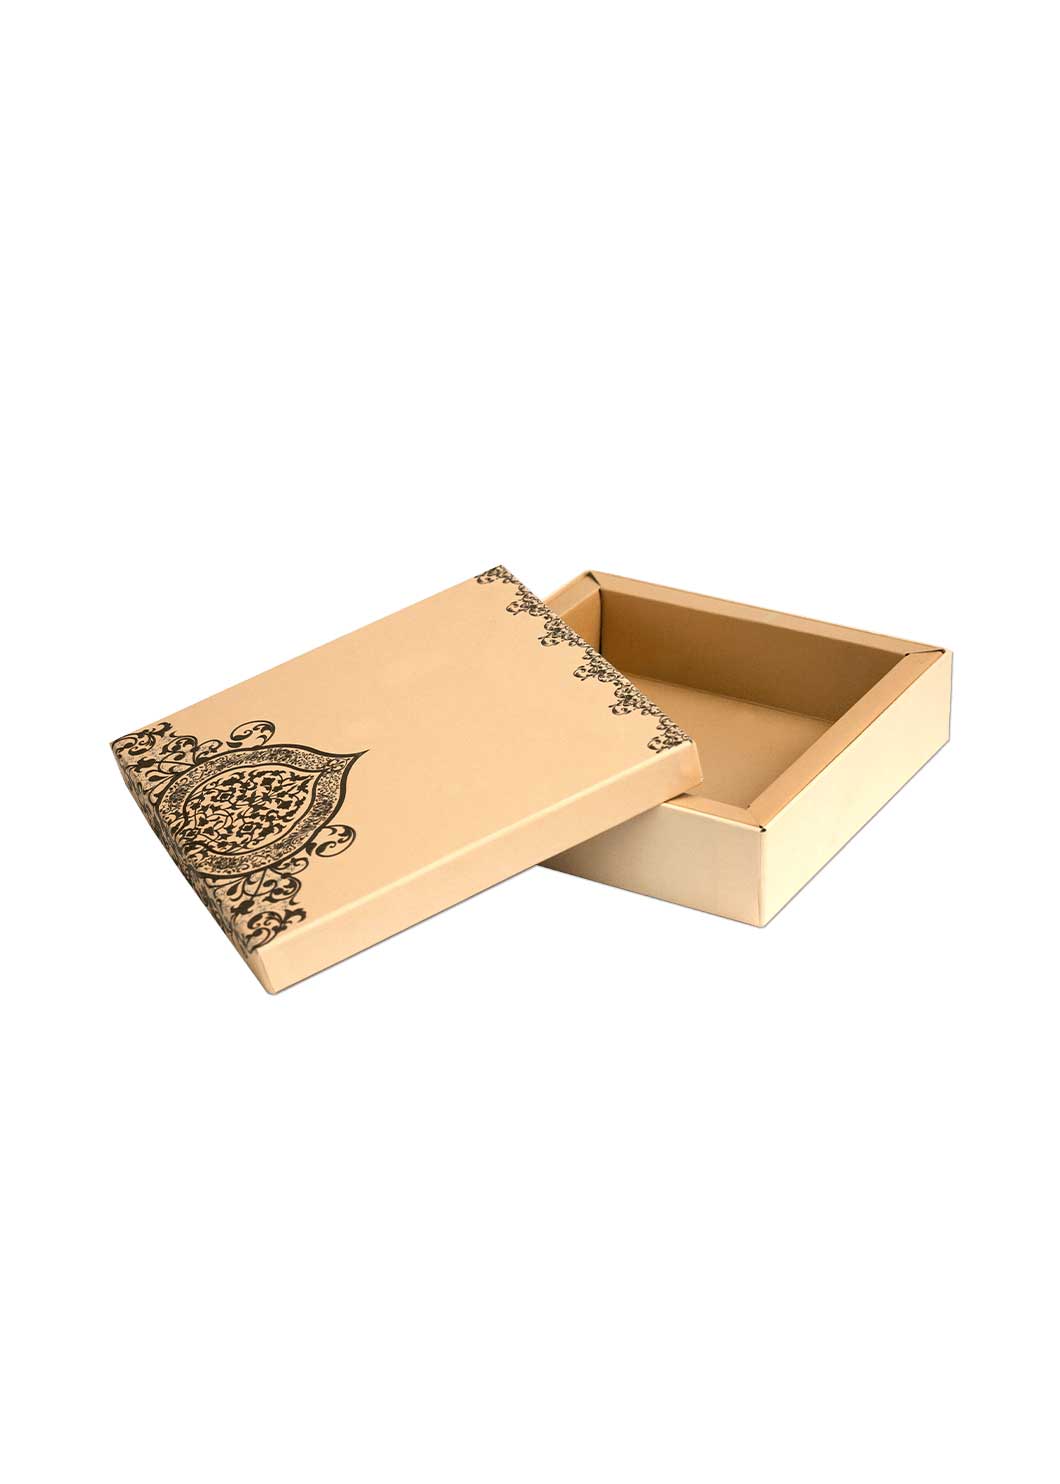 Gold Vintage Ornament Design Box for Packing - 1 Kg Sweet Empty Box